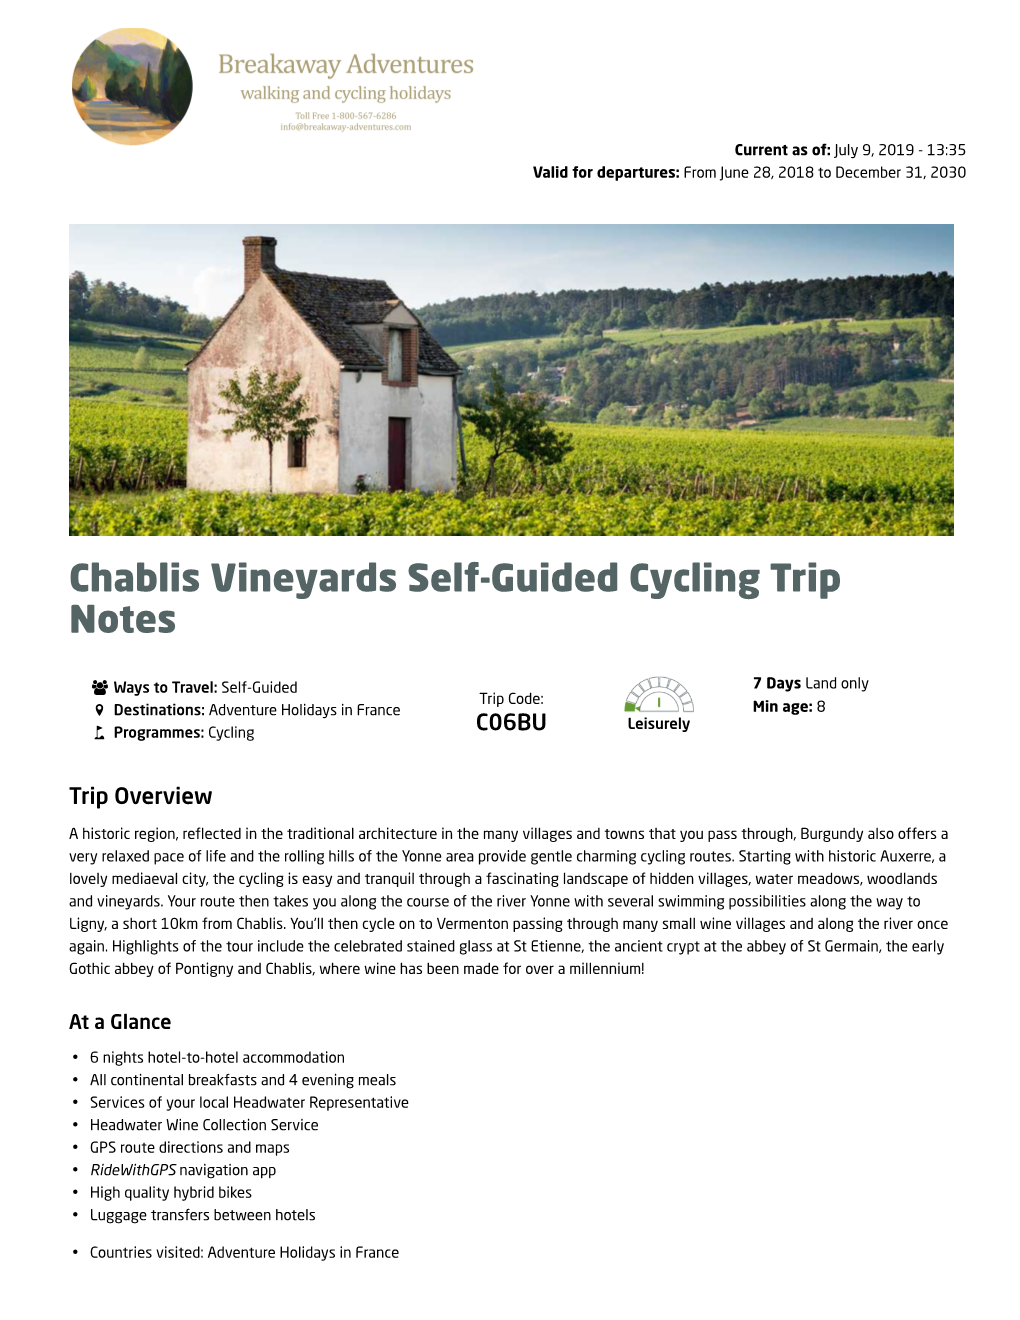 Chablis Vineyards Self-Guided Cycling Trip Notes